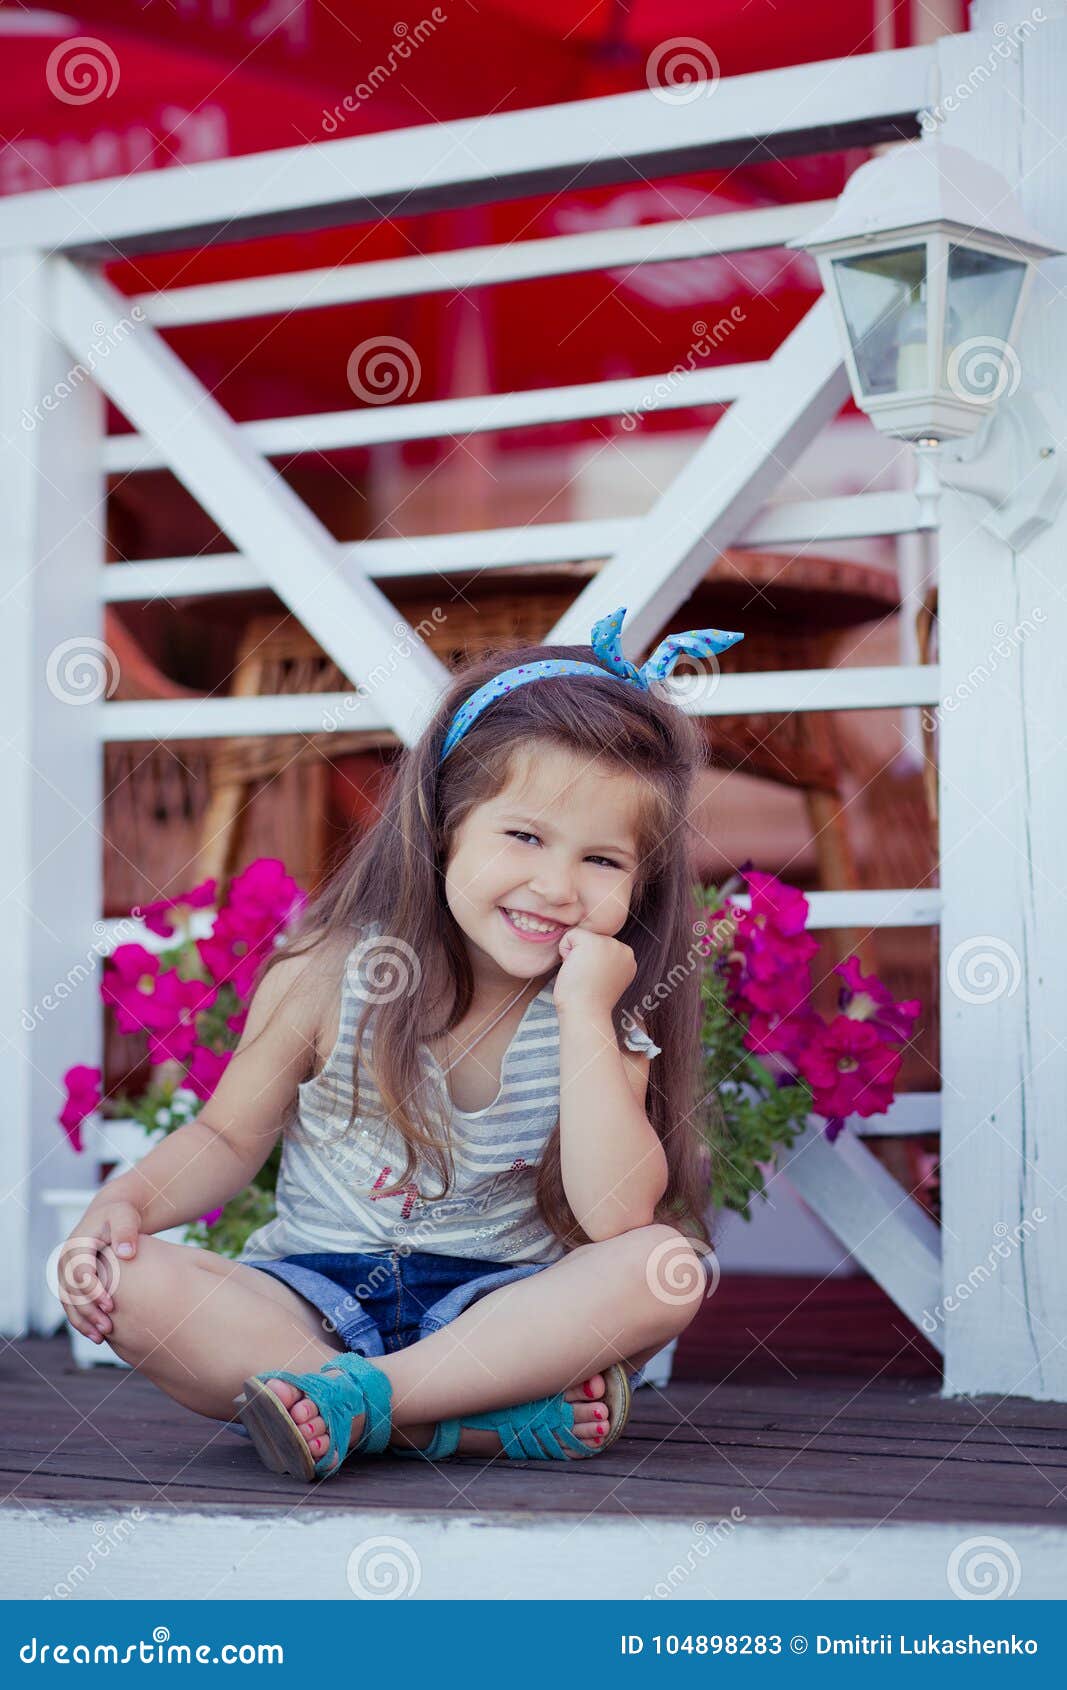 Stylish Beautifull Cute Baby Girl with Brunette Hair Posing on ...